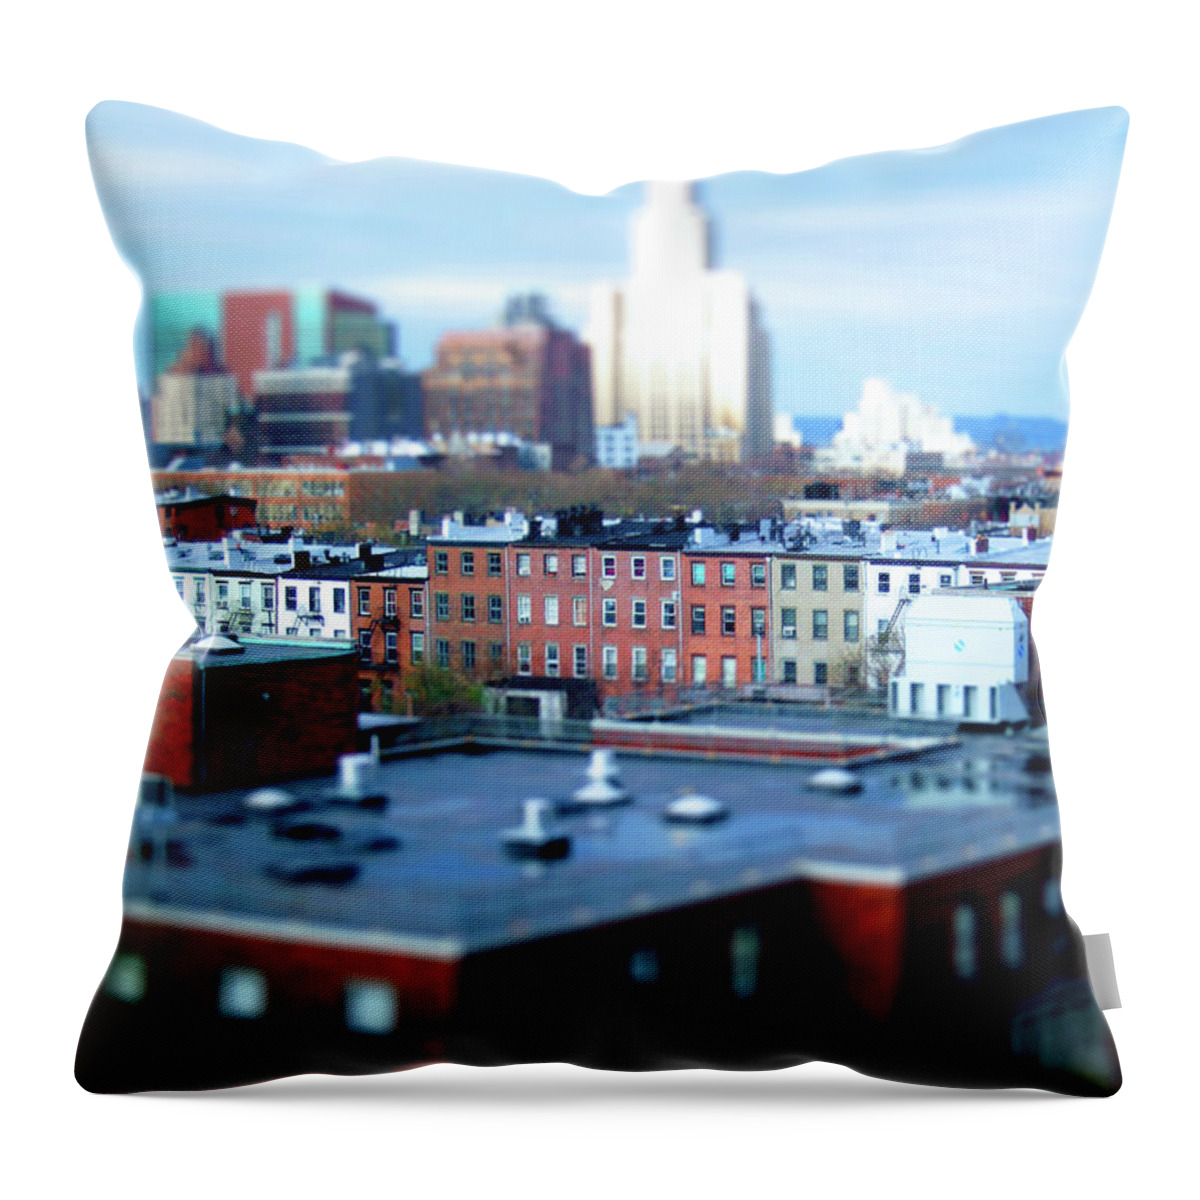 Outdoors Throw Pillow featuring the photograph The View Brooklyn by Angela Martini